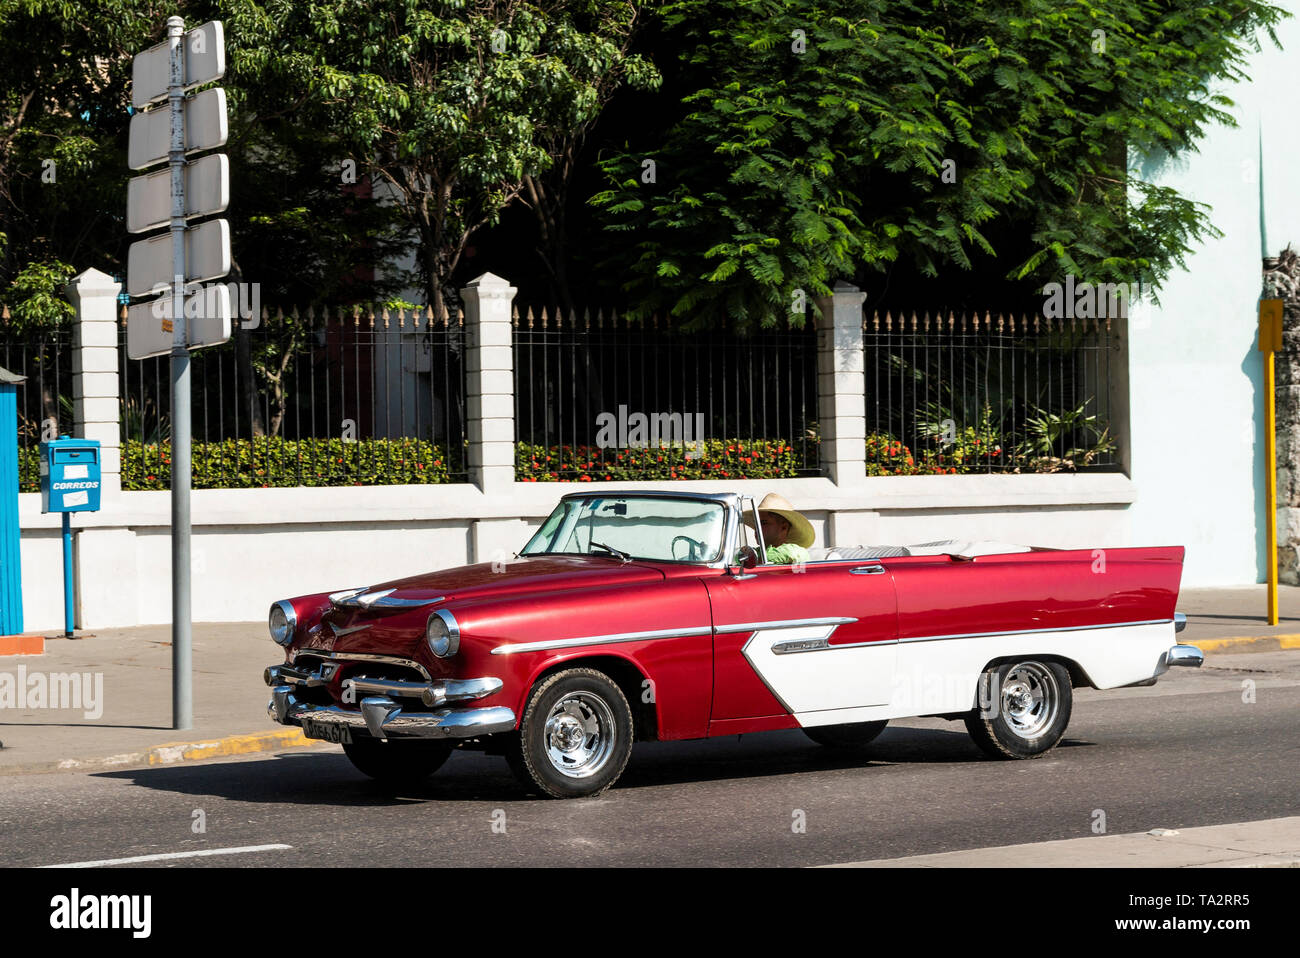 Havana, Cuba - 25 July 2018: A red and white classic Chevy convertible being used as a taxi on the streets of Havana Cuba. Stock Photo